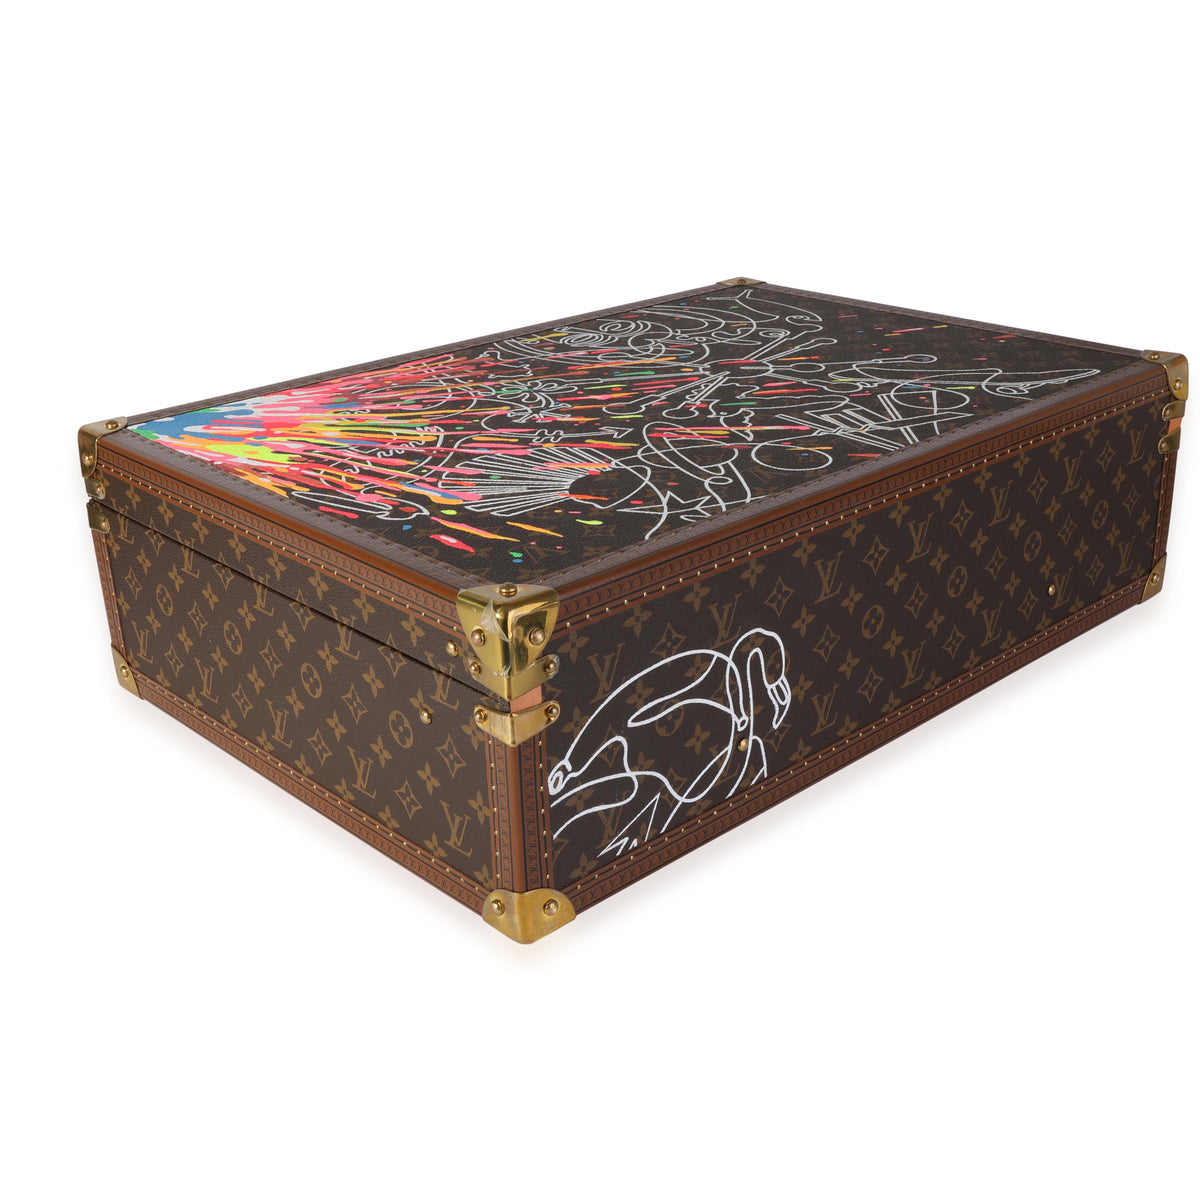 Louis Vuitton Carlos Betancourt Bisten 60 Trunk, 2019 Available For  Immediate Sale At Sotheby's